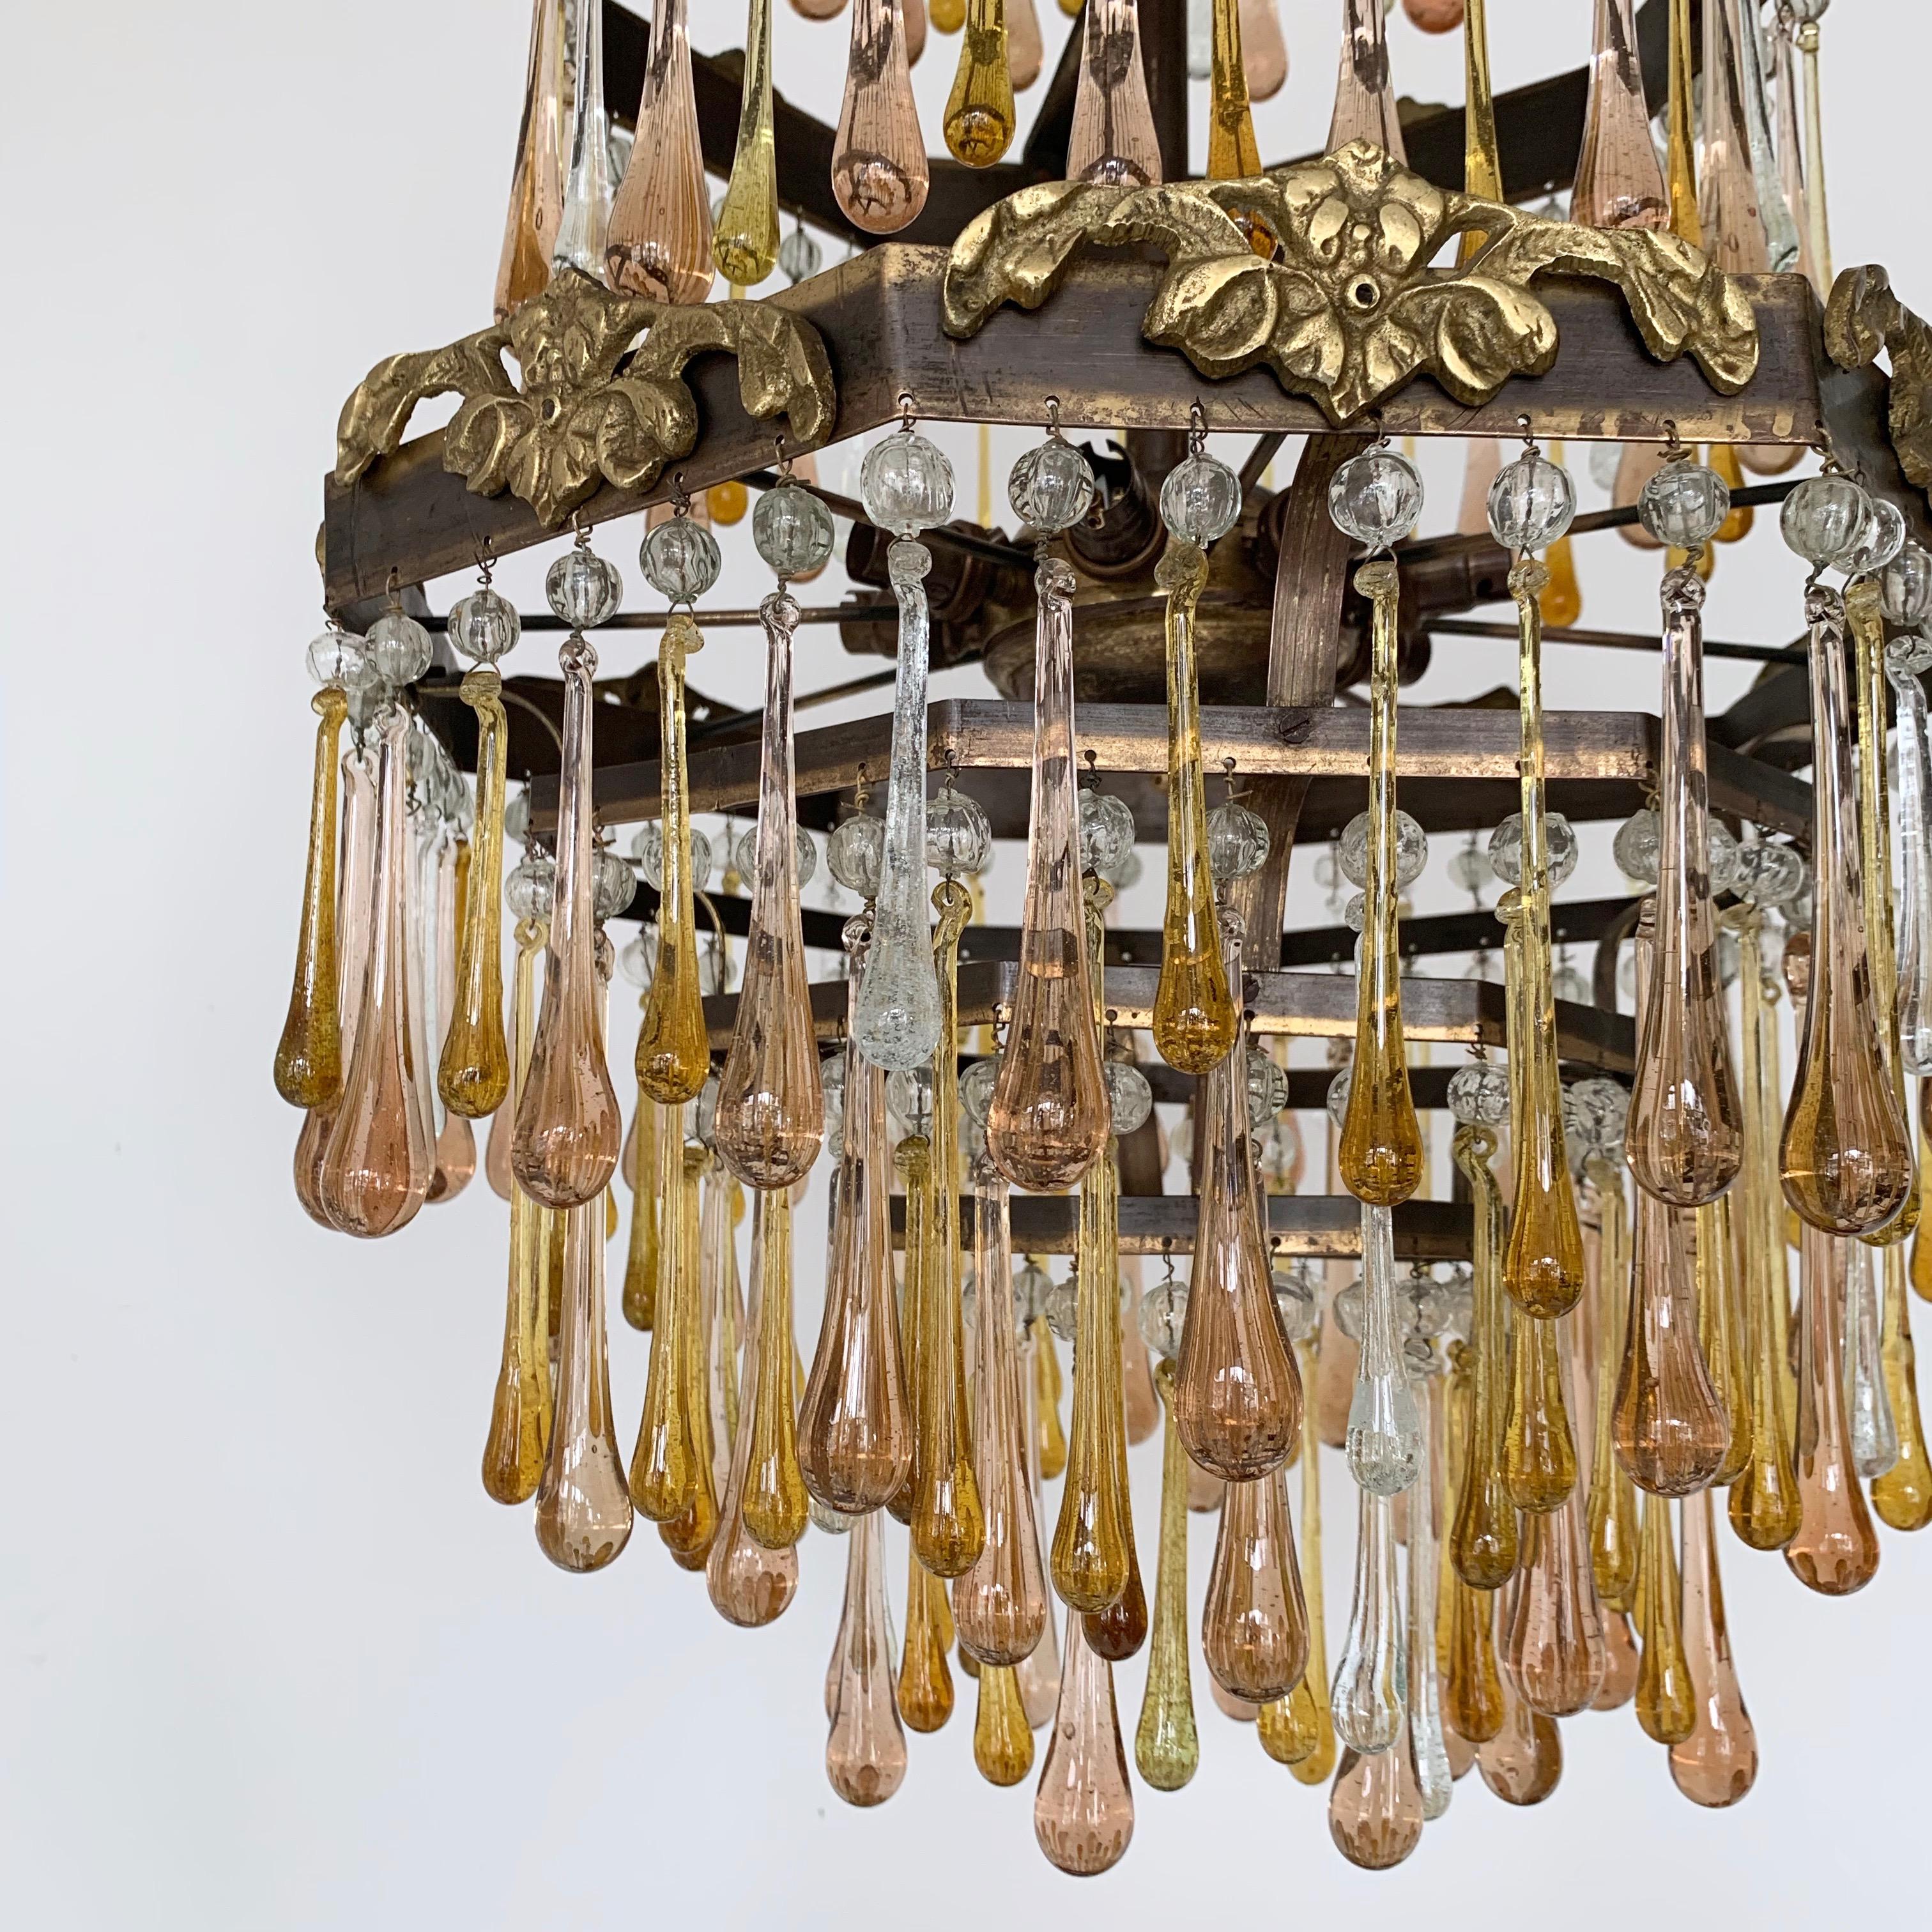 Early 1900s French Brass Waterfall Chandelier Frame Dressed in Peach and Amber For Sale 5